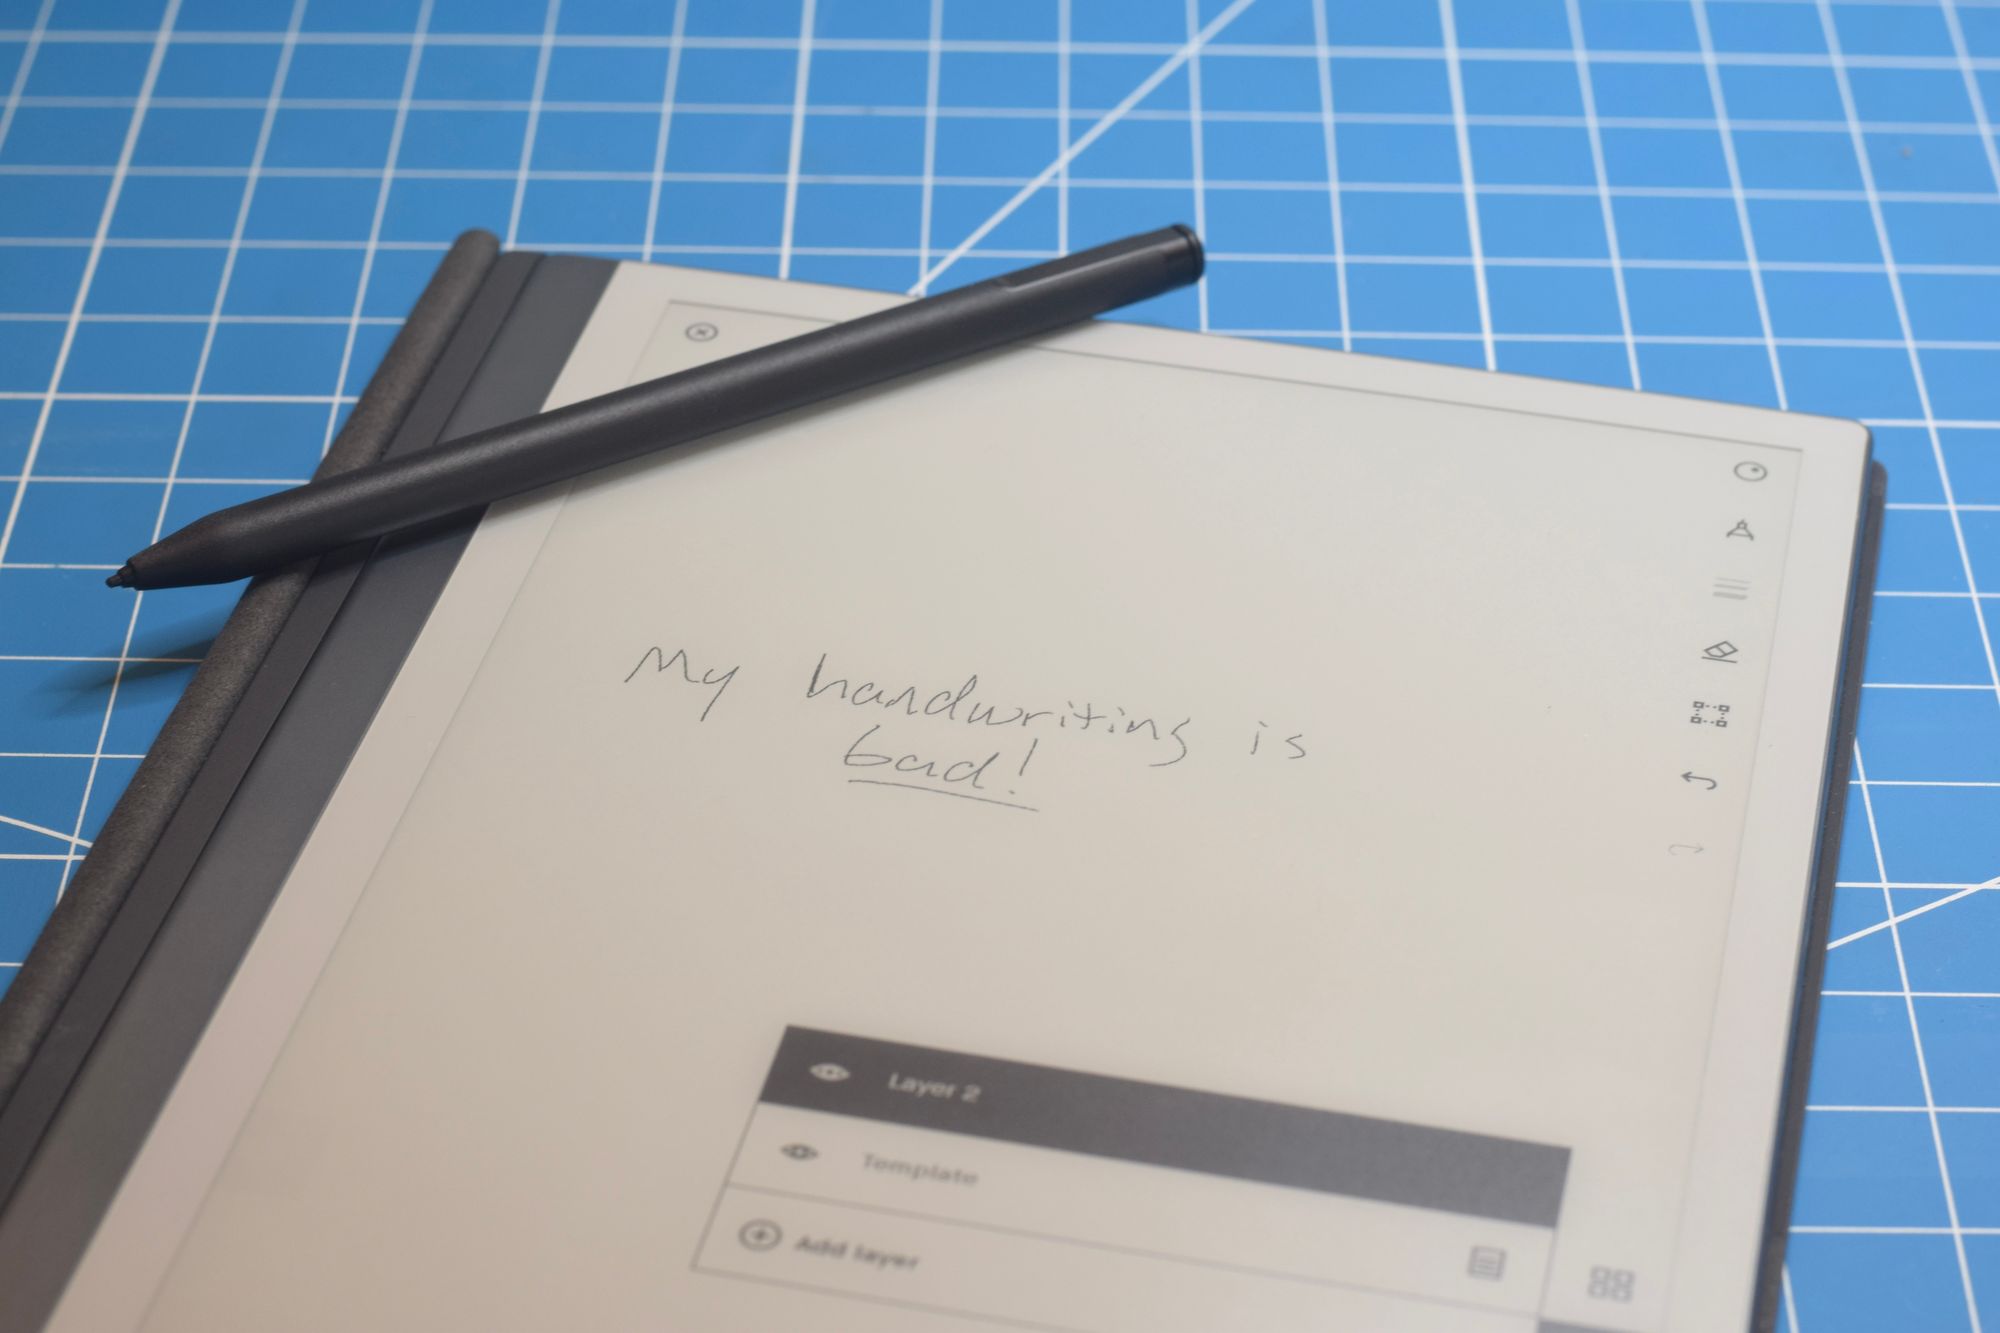 ReMarkable 2 review: A magic legal pad from the future